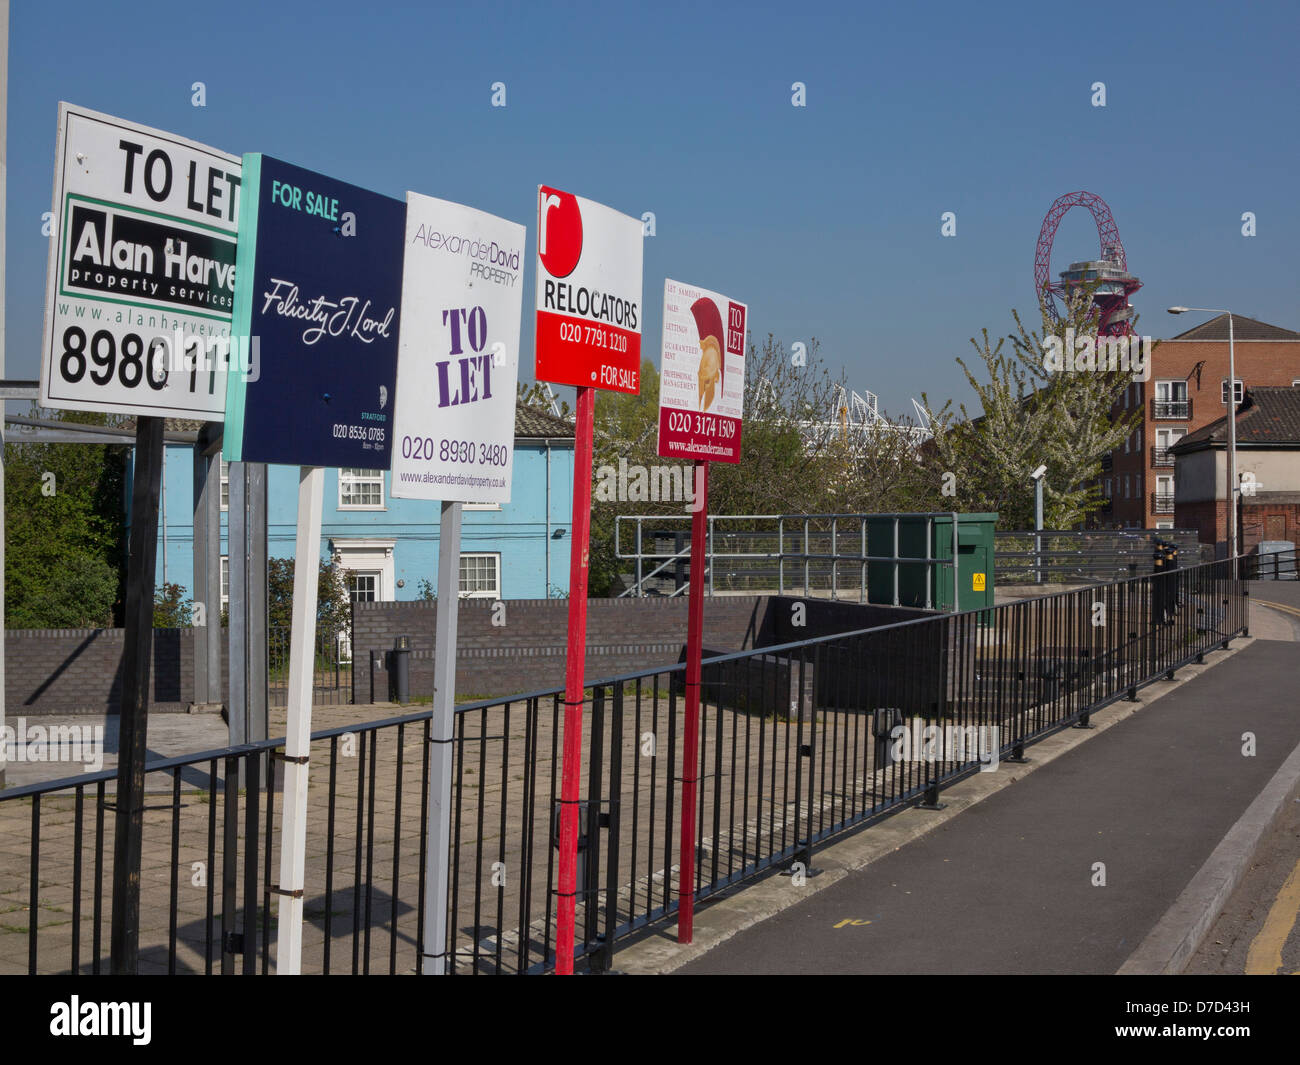 For sale and to let property signs in Stratford by the London 2012 Queen Elizabeth II Olympic Park Stock Photo